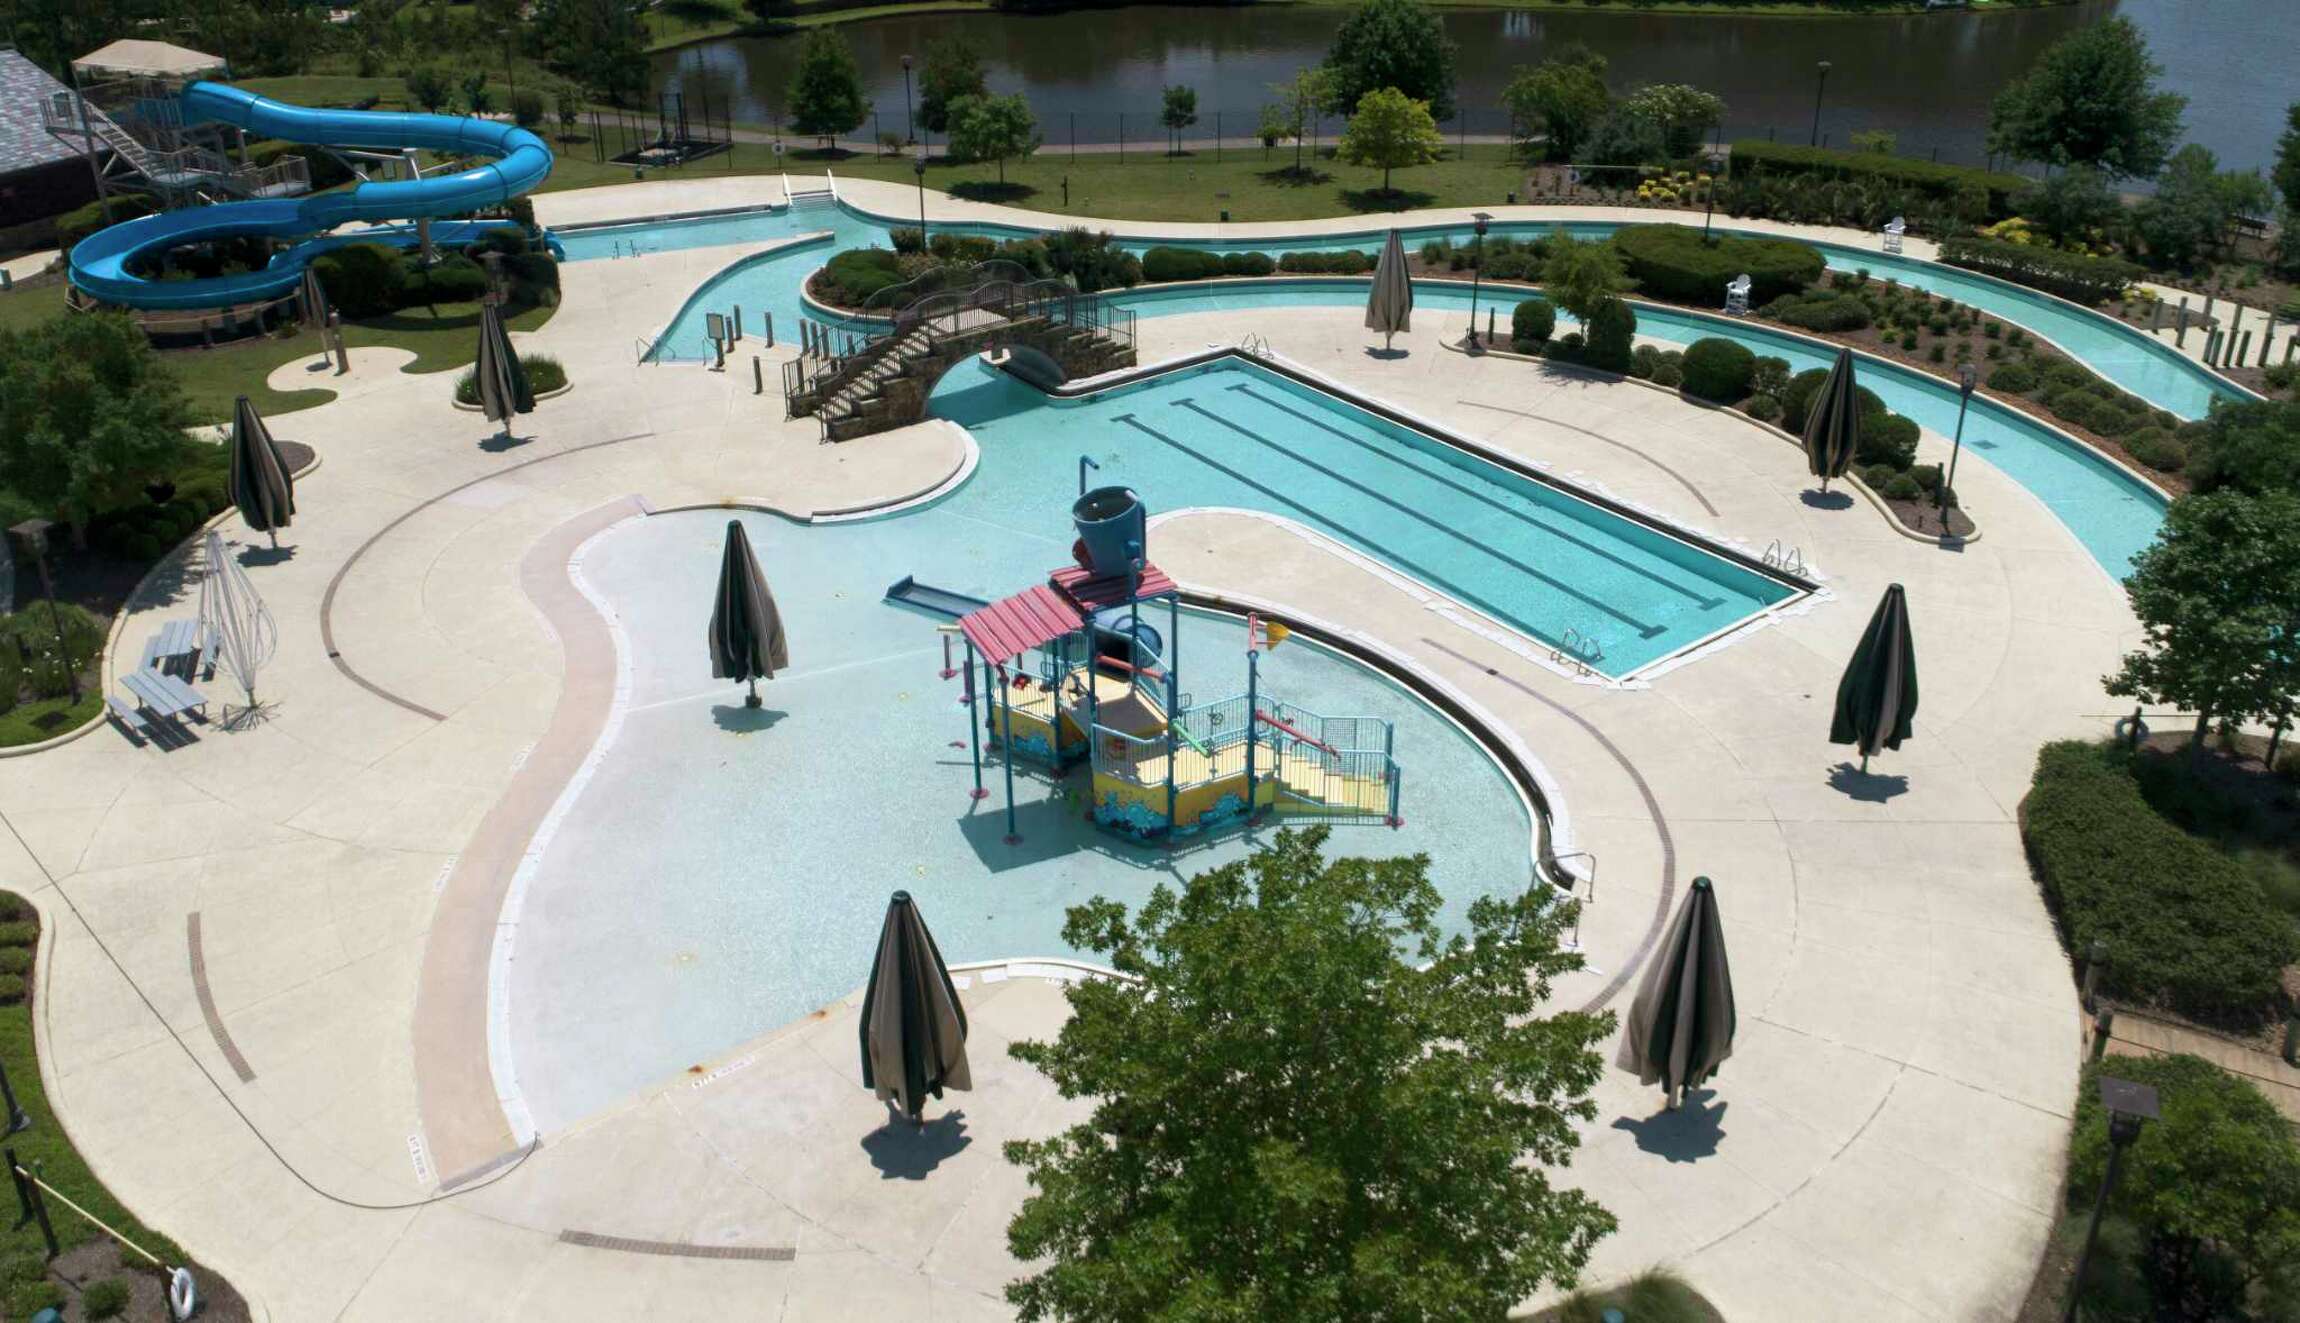 Public pools in Houston suburbs Katy, Cypress, Pearland and more